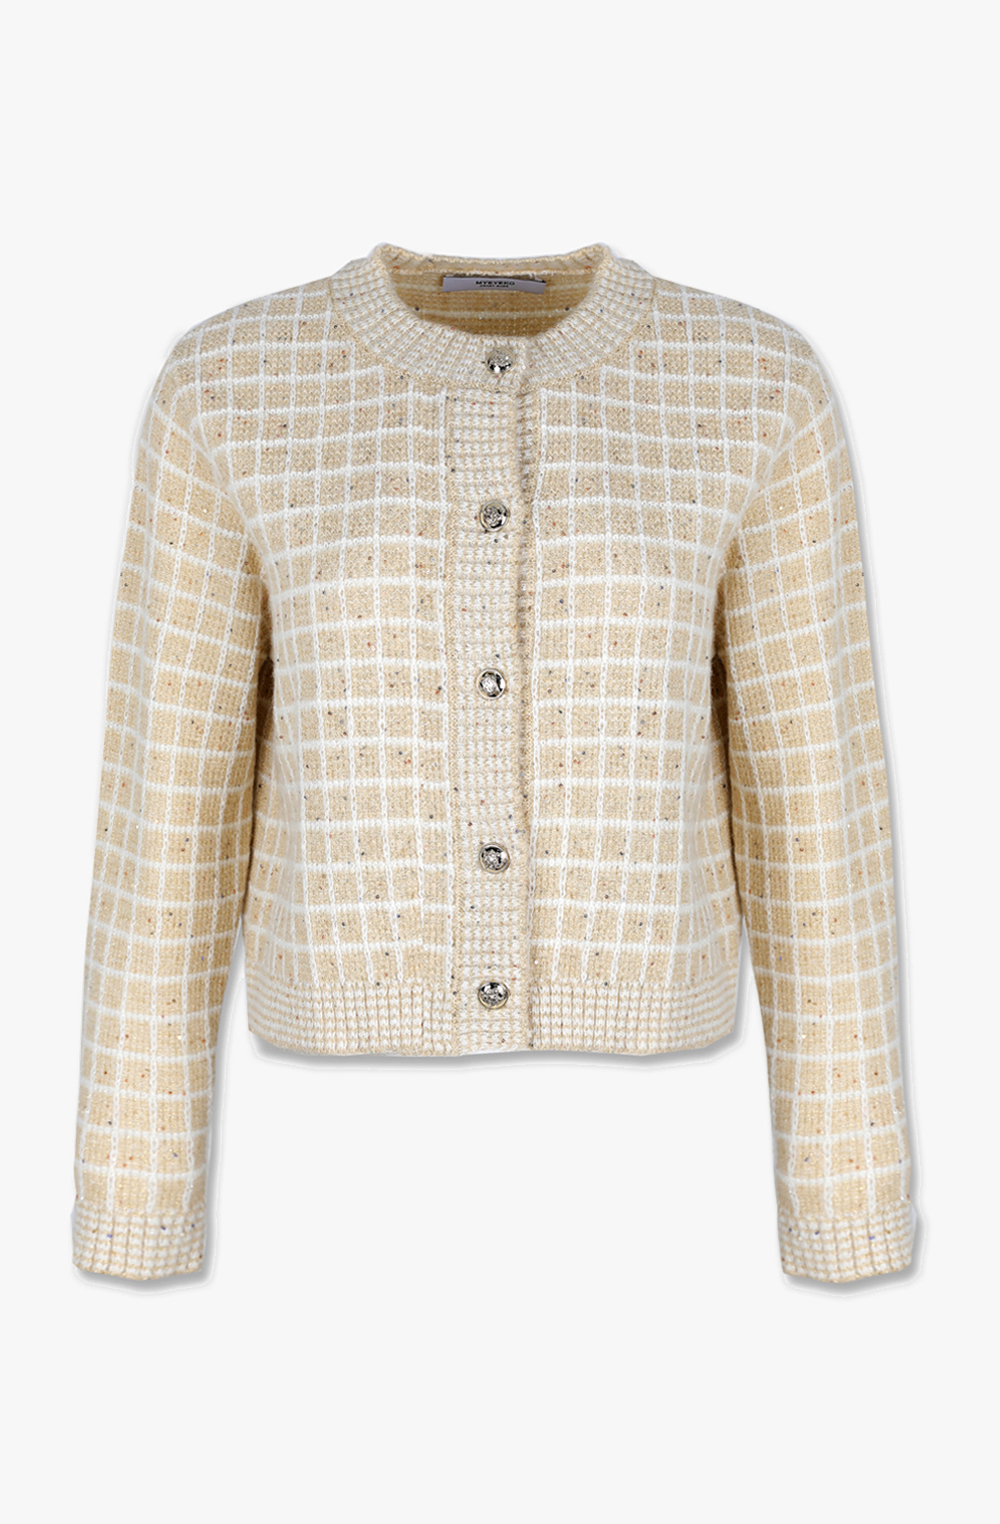 HIGH QUALITY LINE - MYEYEKO 23 EARLY SPRING / BARRIE SEQUIN TWEED KNIT CARDIGAN (GOLD)